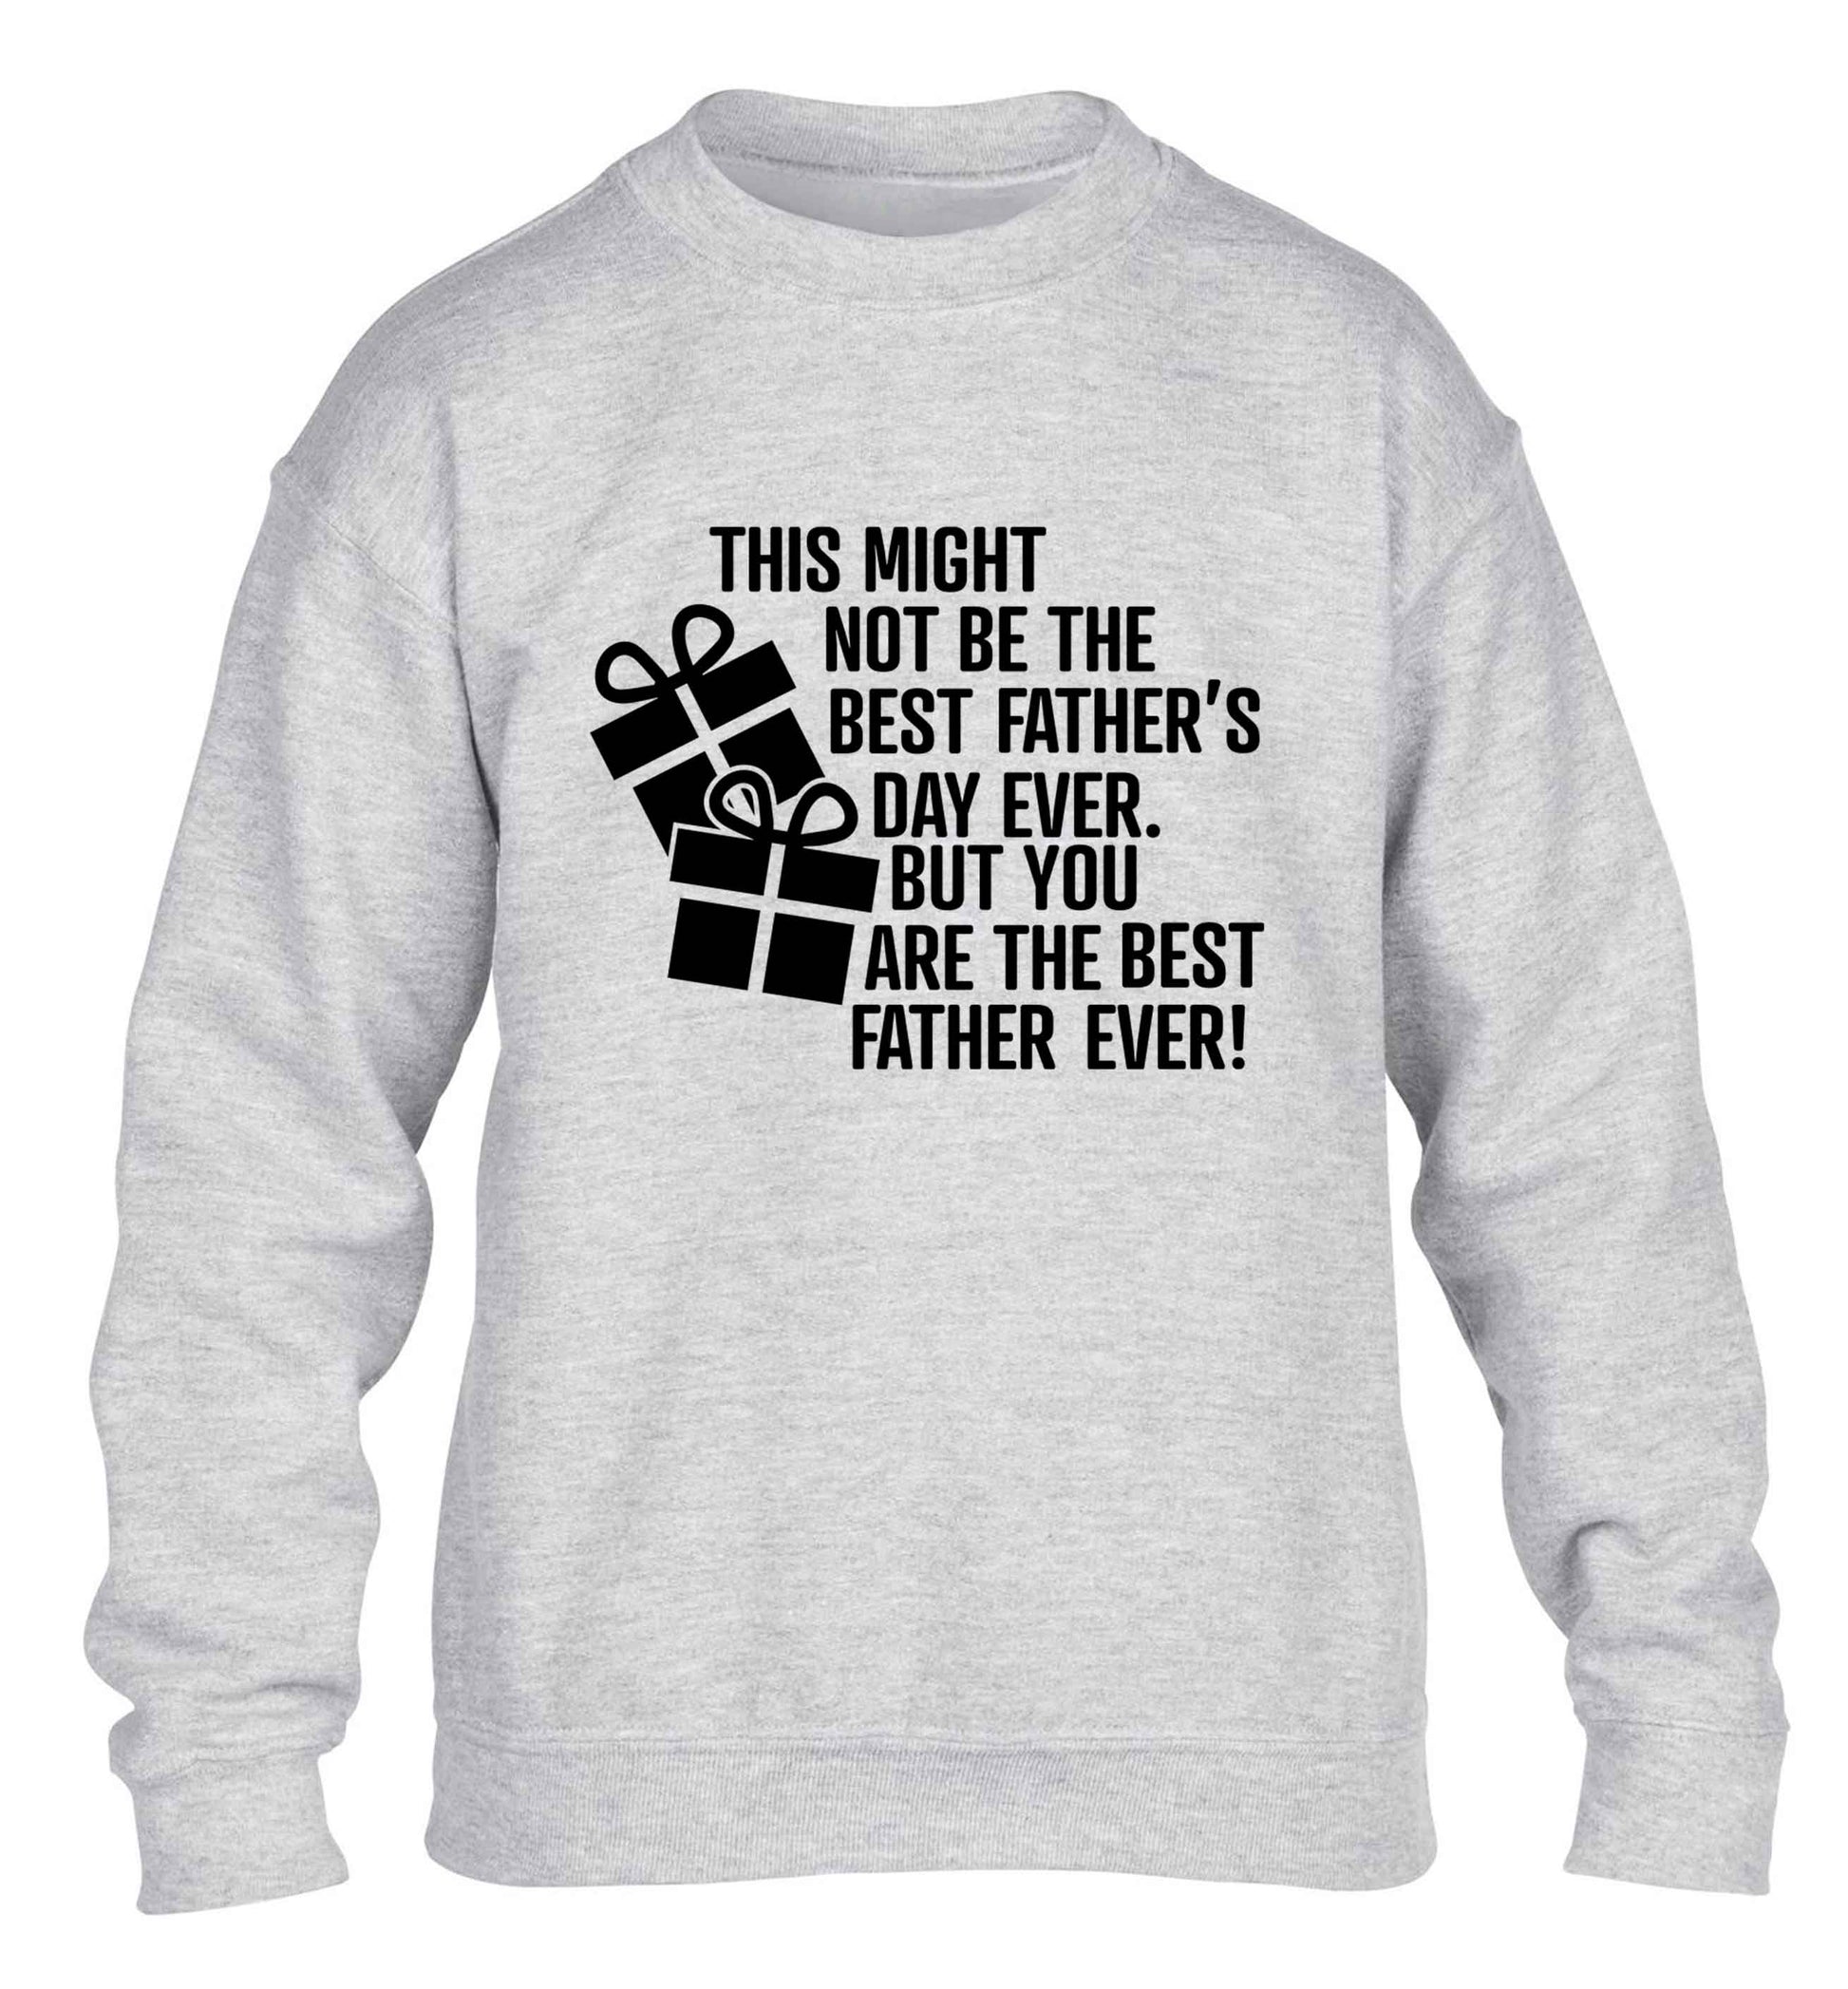 It might not be the best Father's Day ever but you are the best father ever! children's grey sweater 12-13 Years